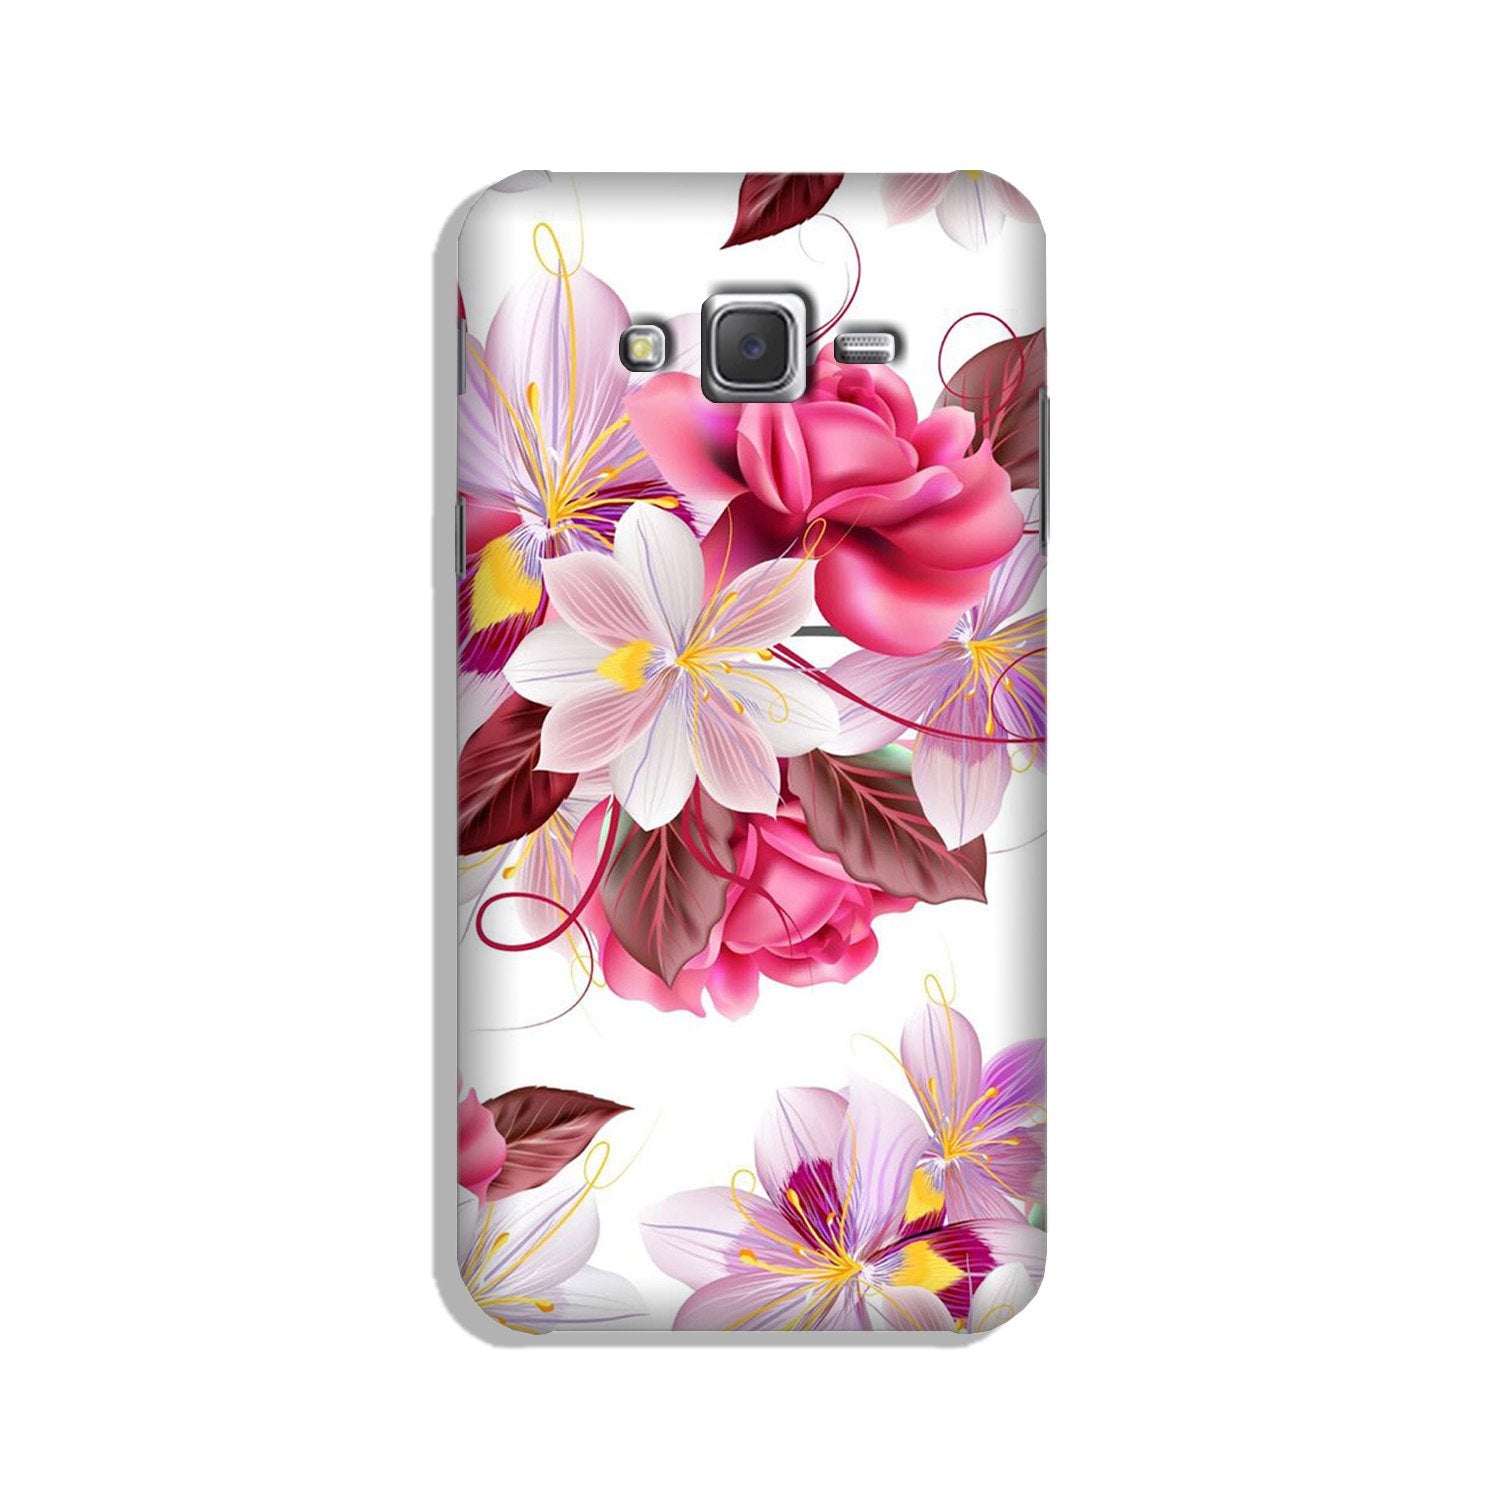 Beautiful flowers Case for Galaxy J7 (2015)